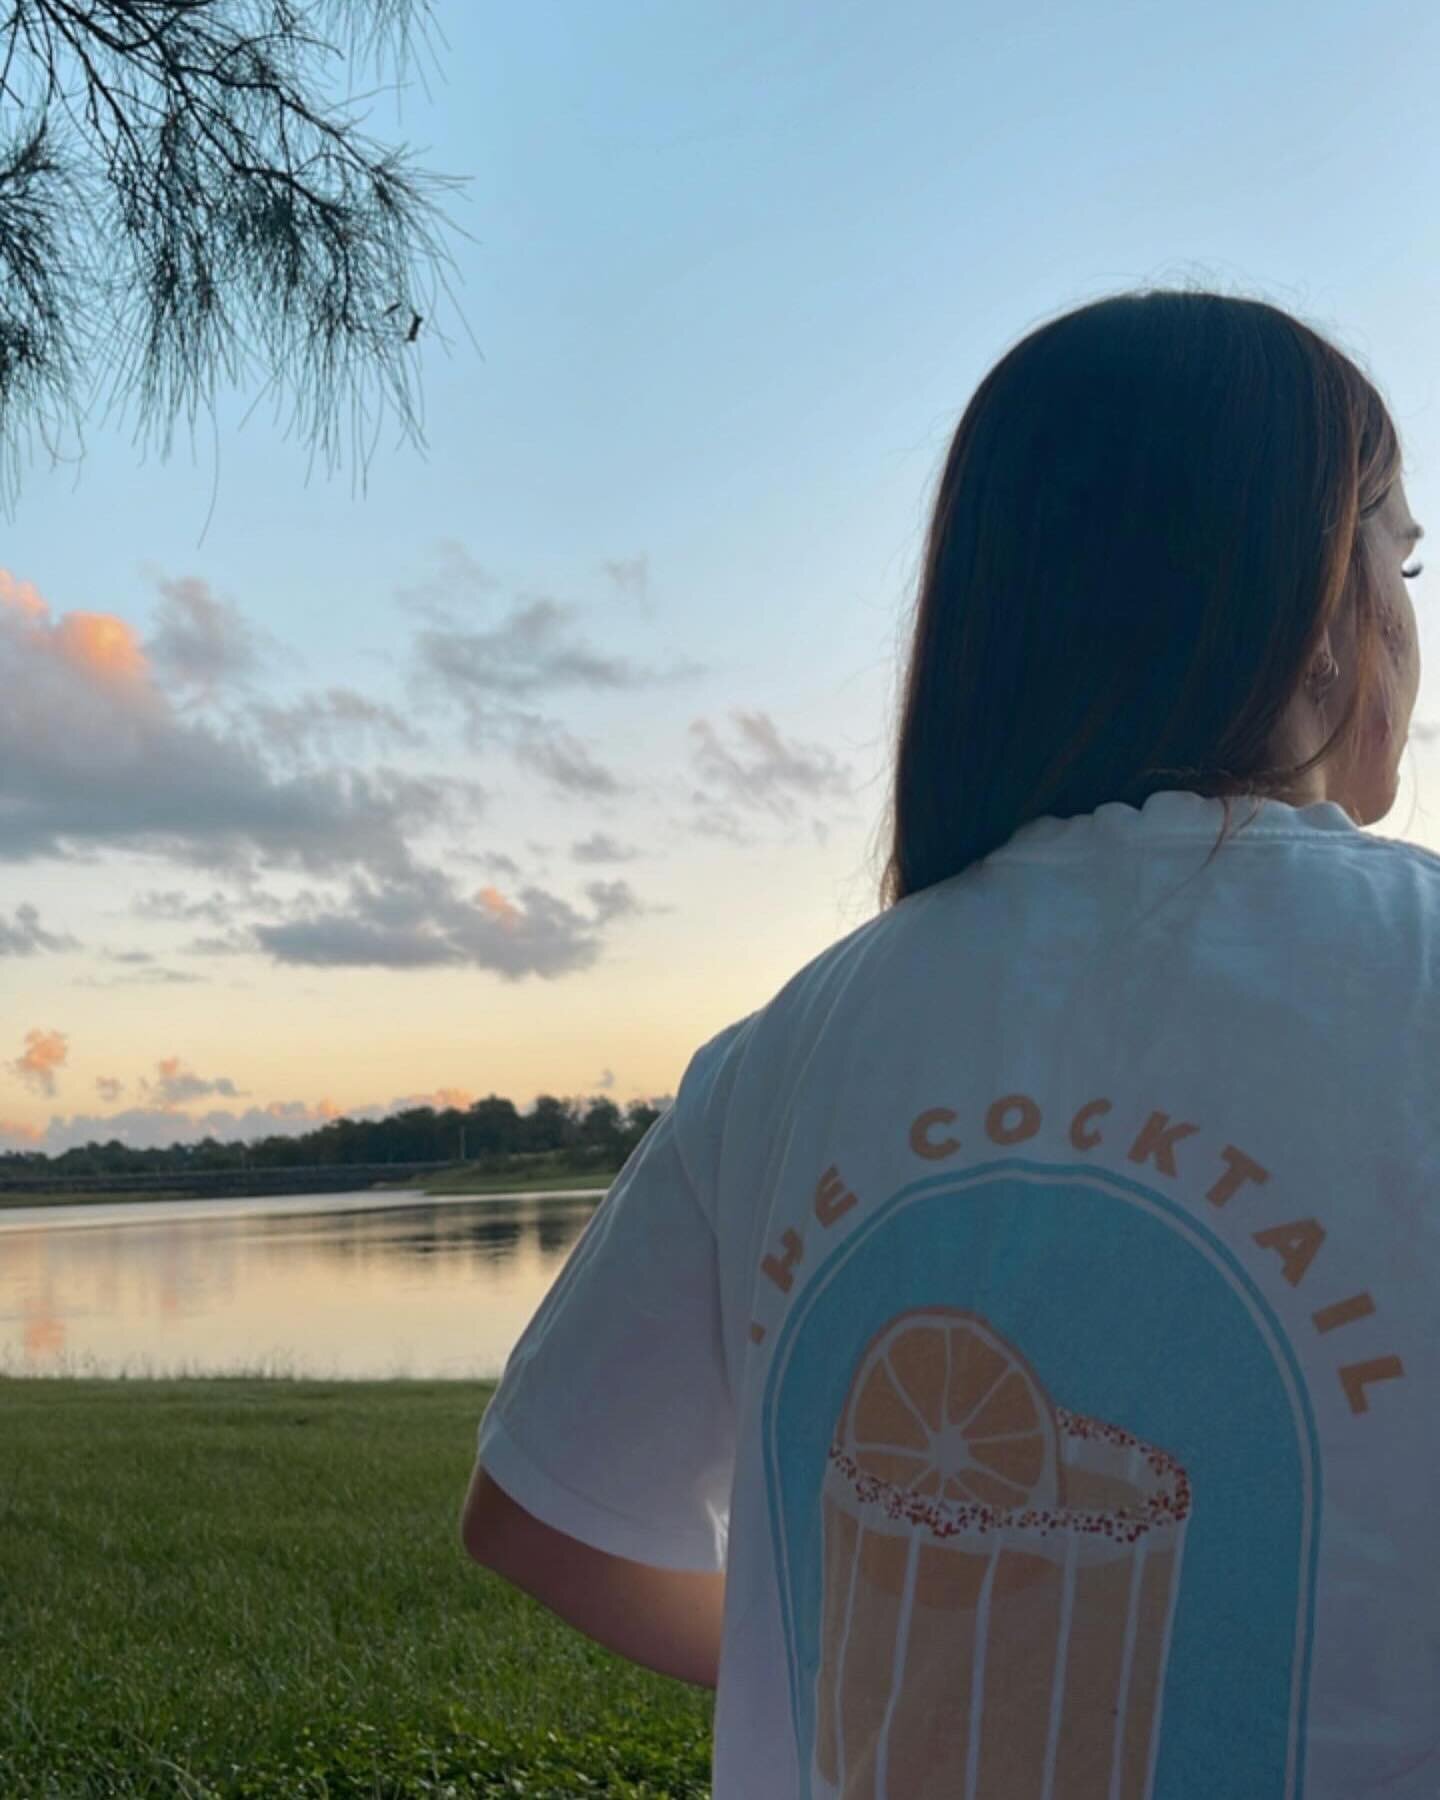 Catching the first light with Lia. Her early morning vibe? Perfectly casual in our signature cocktail club tee #CustomerSpotlight